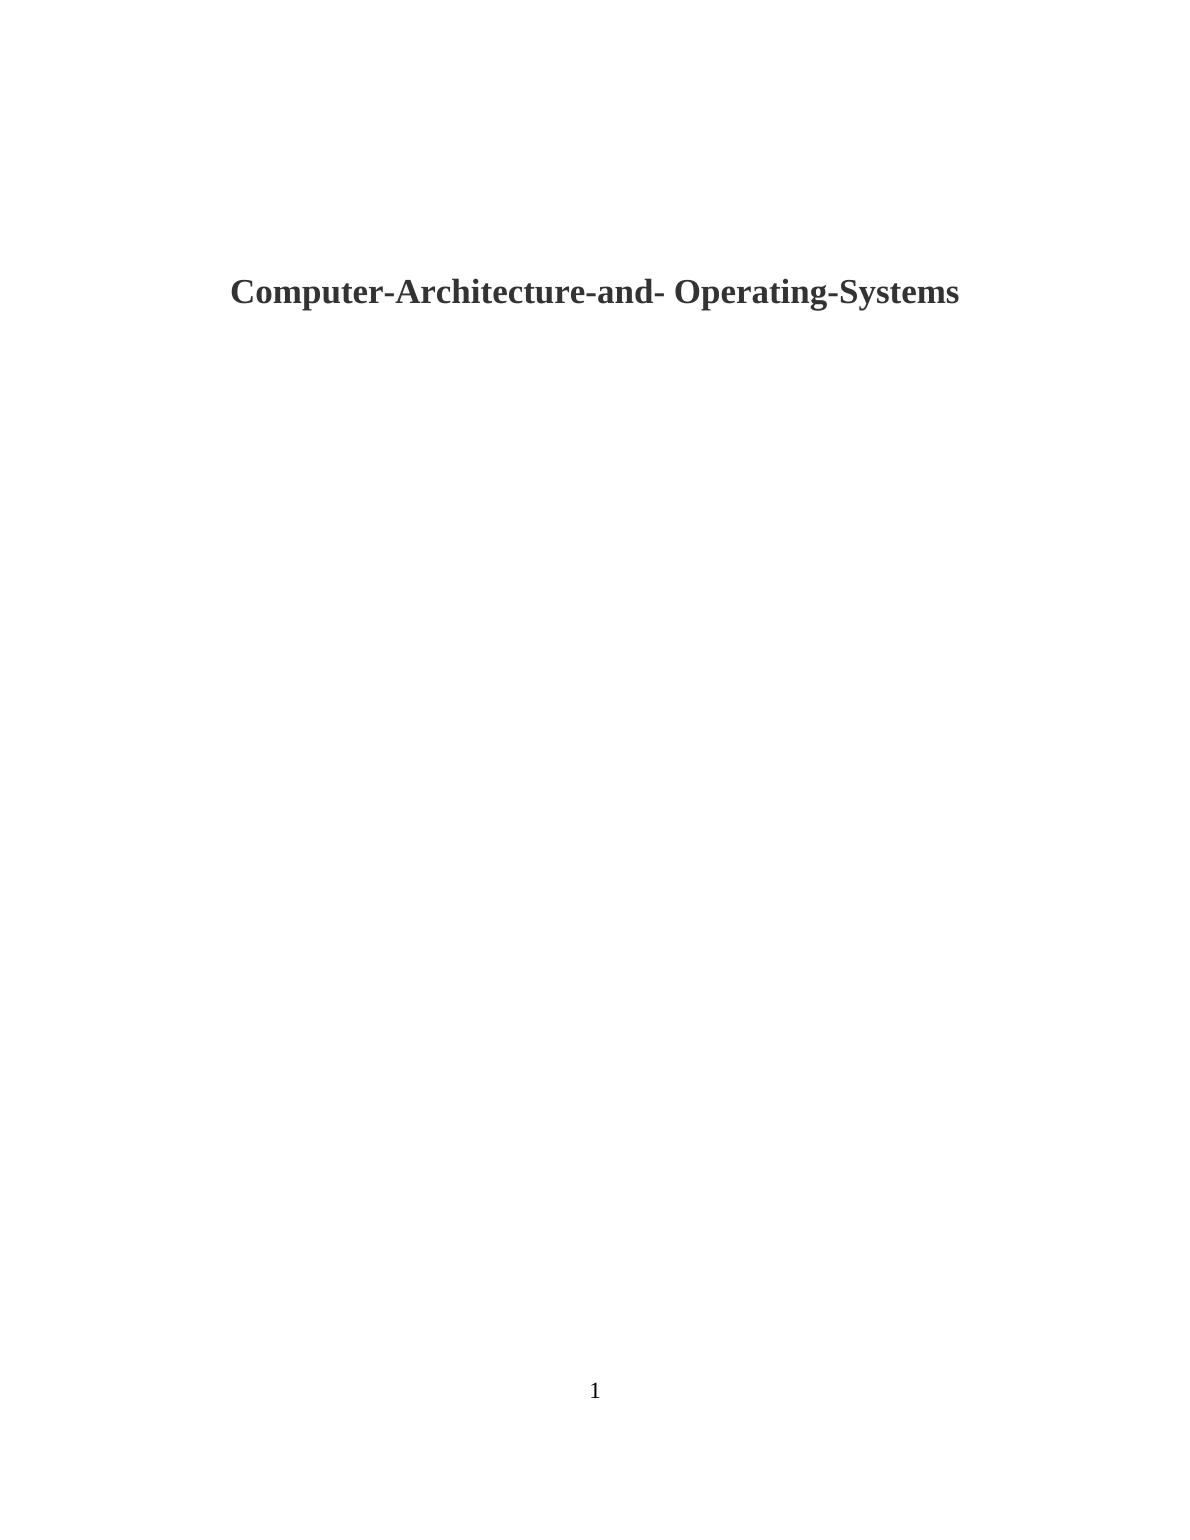 Computer Architecture and Operating Systems_1